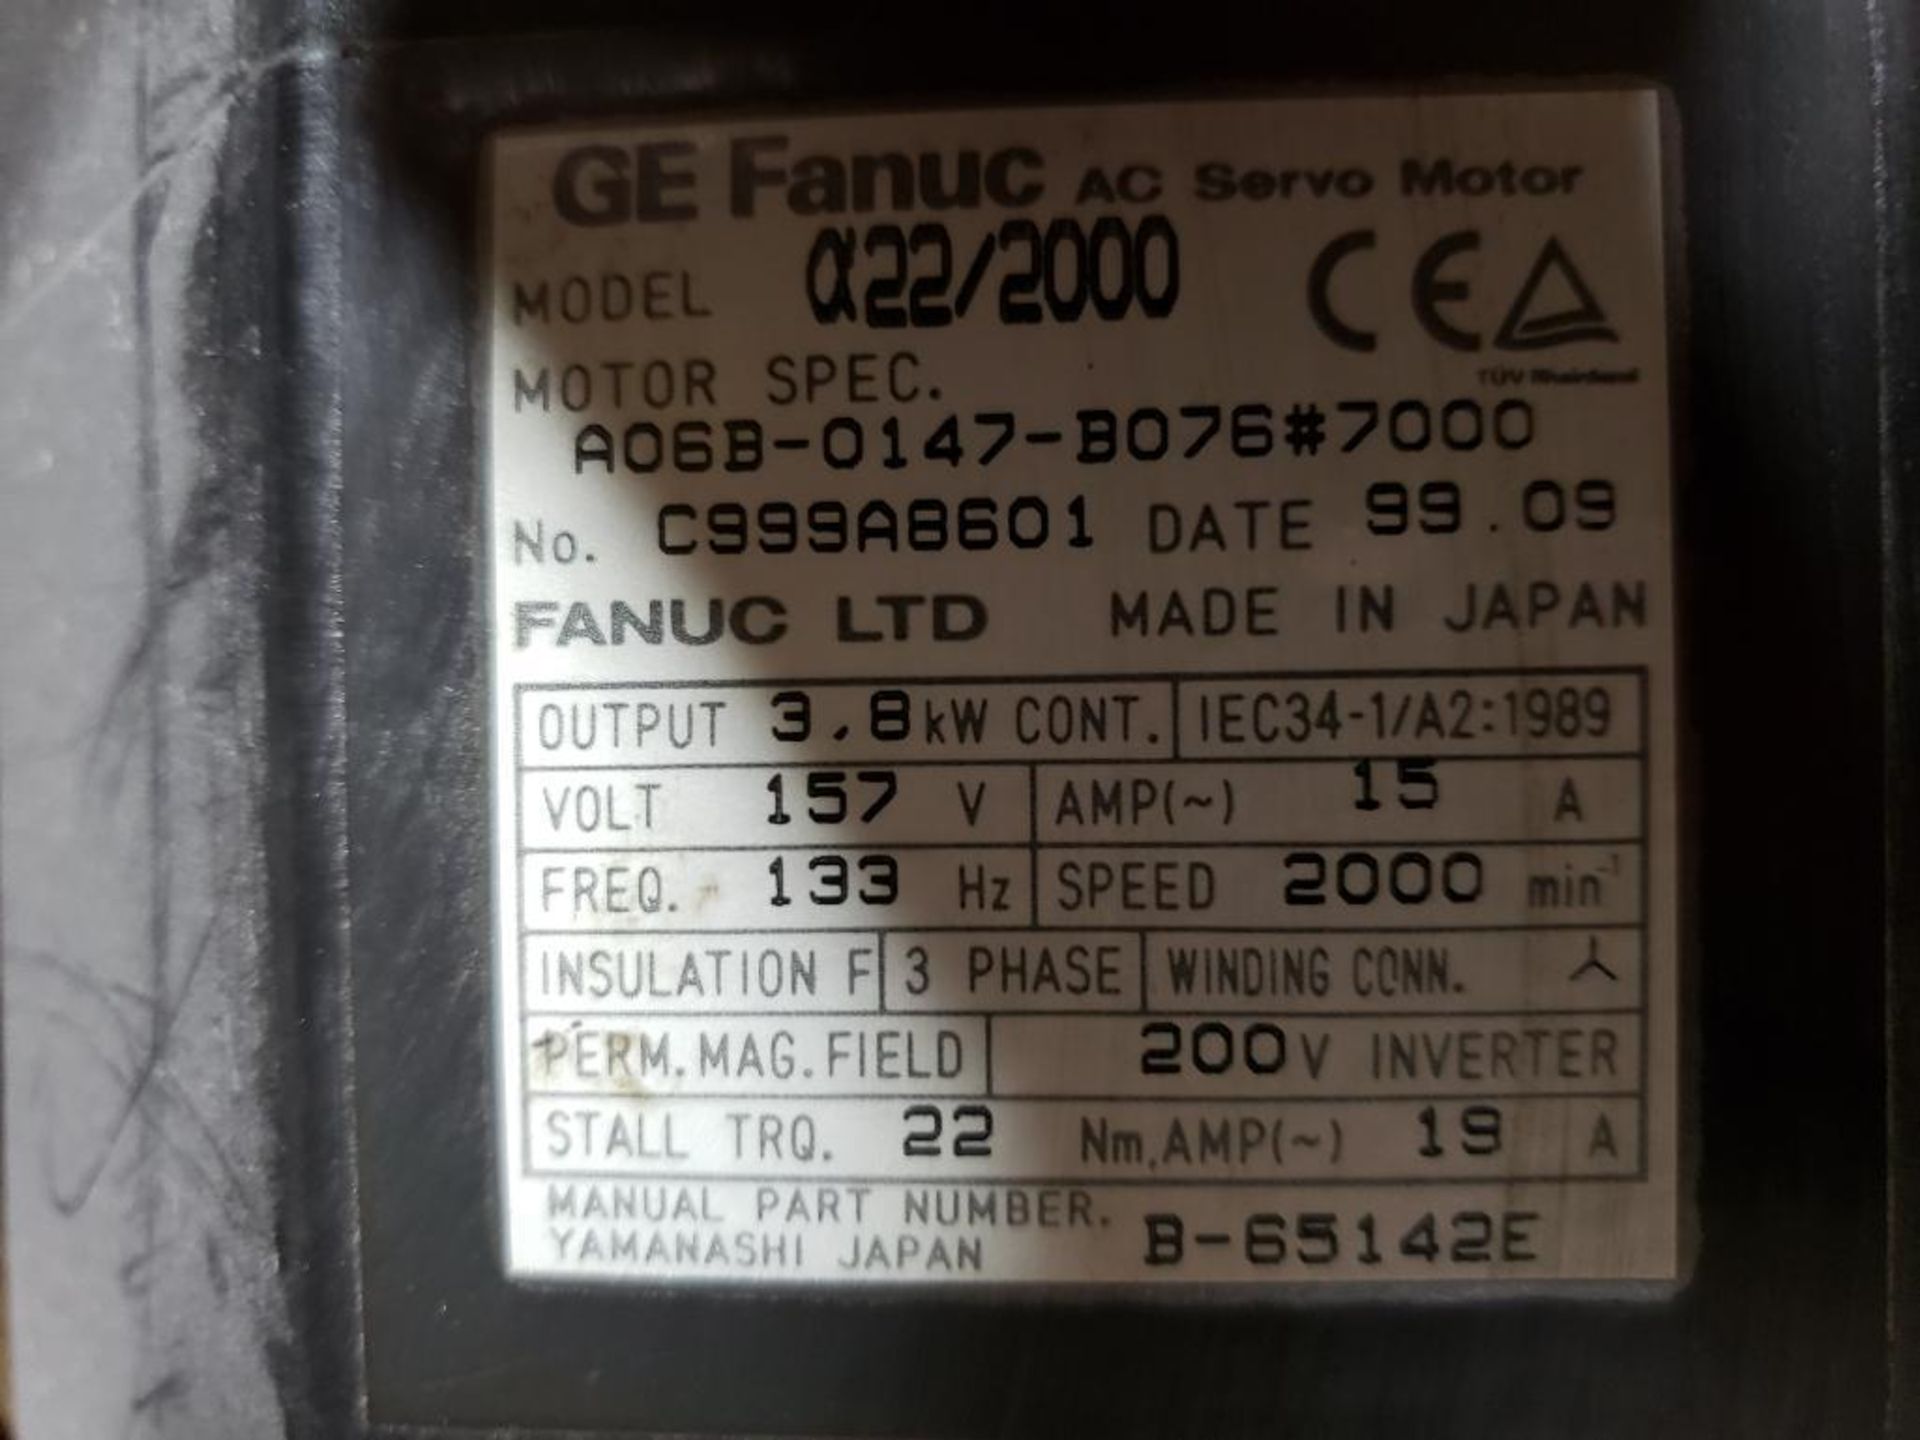 3.8kW GE Fanuc AC servo motor. A06B-0147-B076. 157V, 15AMP, 133Hz, 2000RPM. - Image 2 of 2